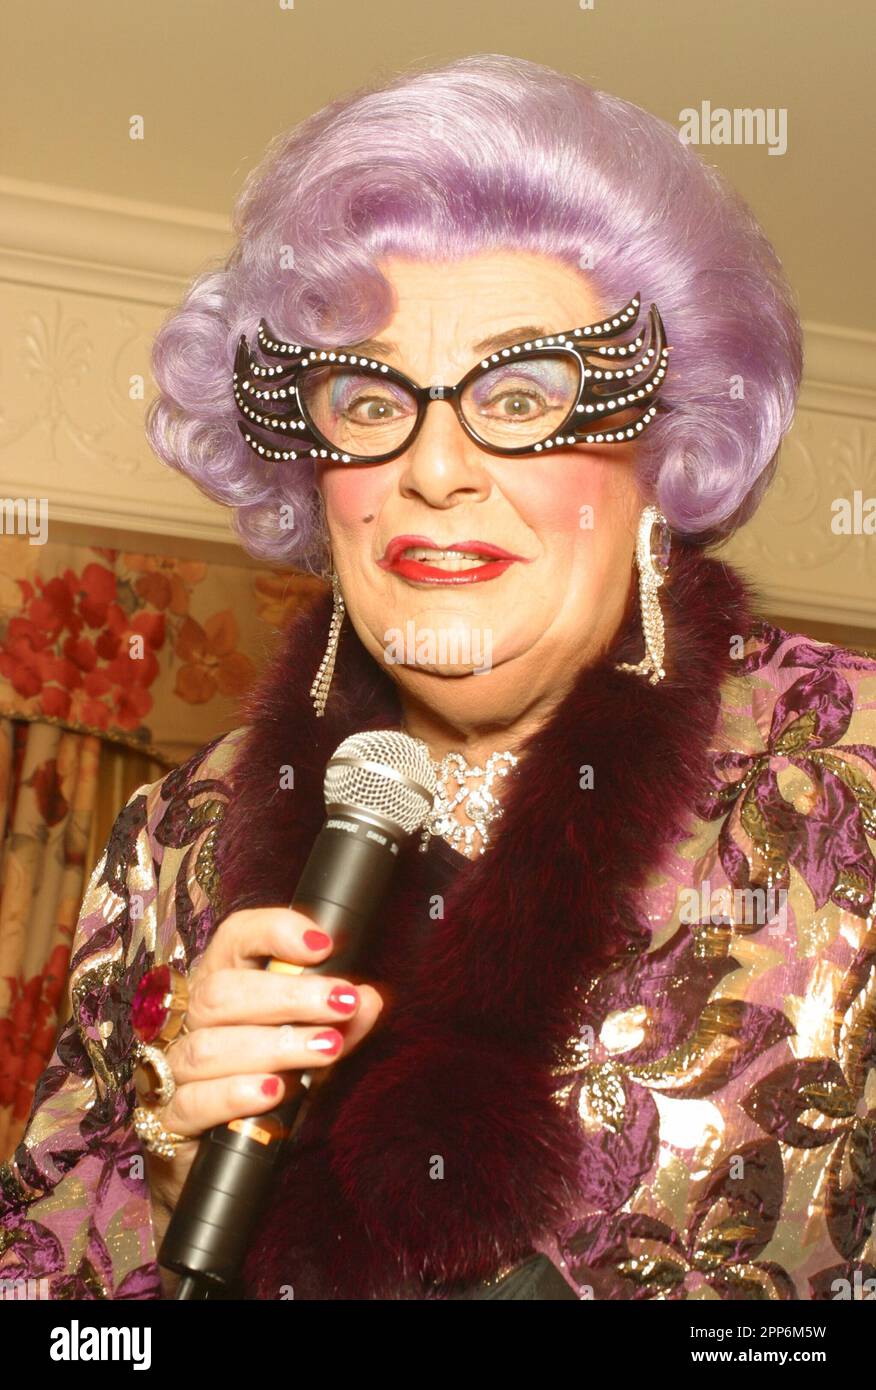 **FILE PHOTO** Dame Edna Has Passed Away. Dame Edna (Barry Humphries) photographed in Philadelphia, PA. February 4, 2003. Credit: Scott Weiner/MediaPunch Stock Photo